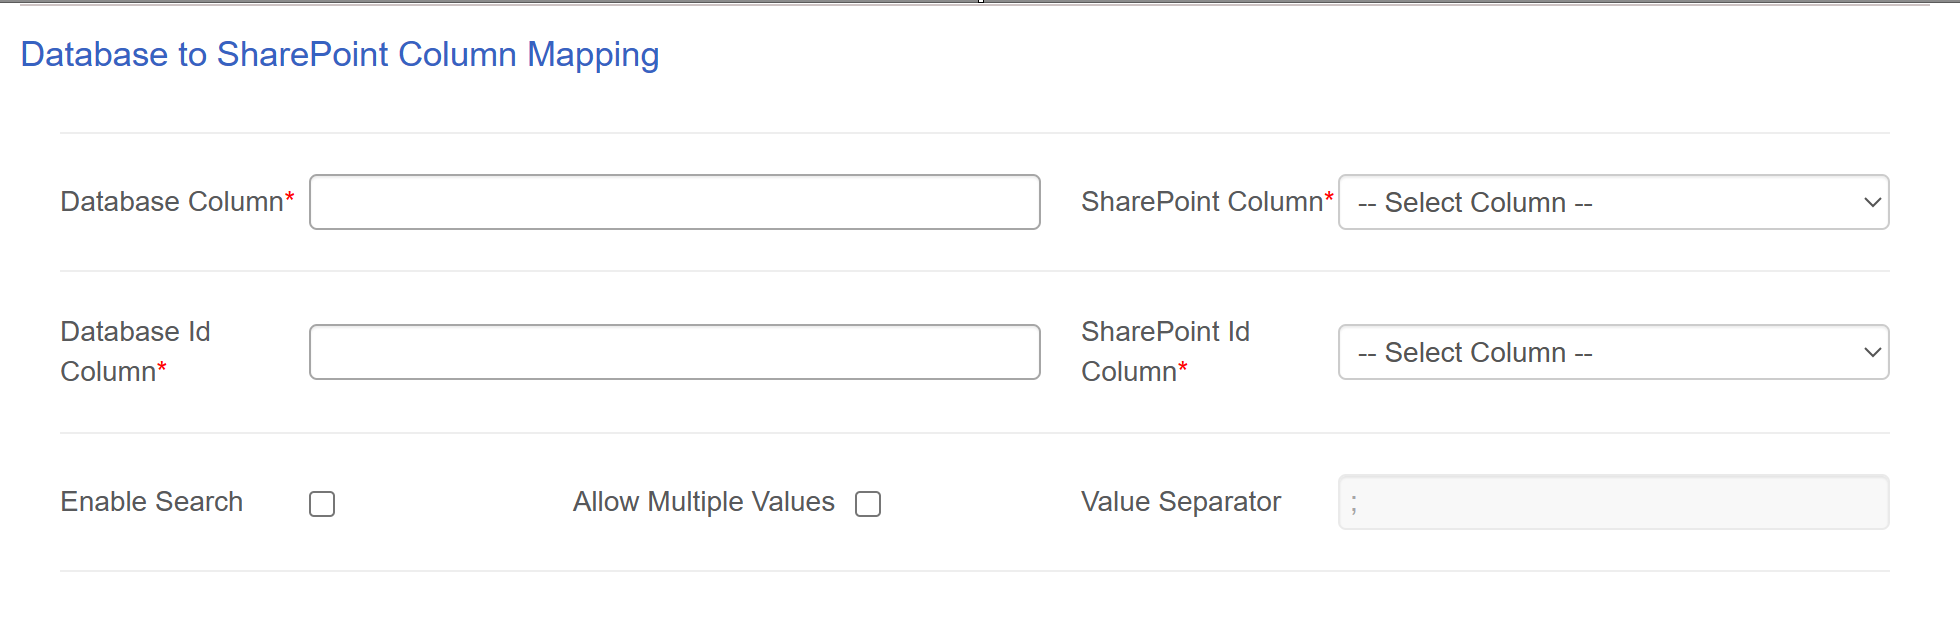 Database to sharepoint mapping